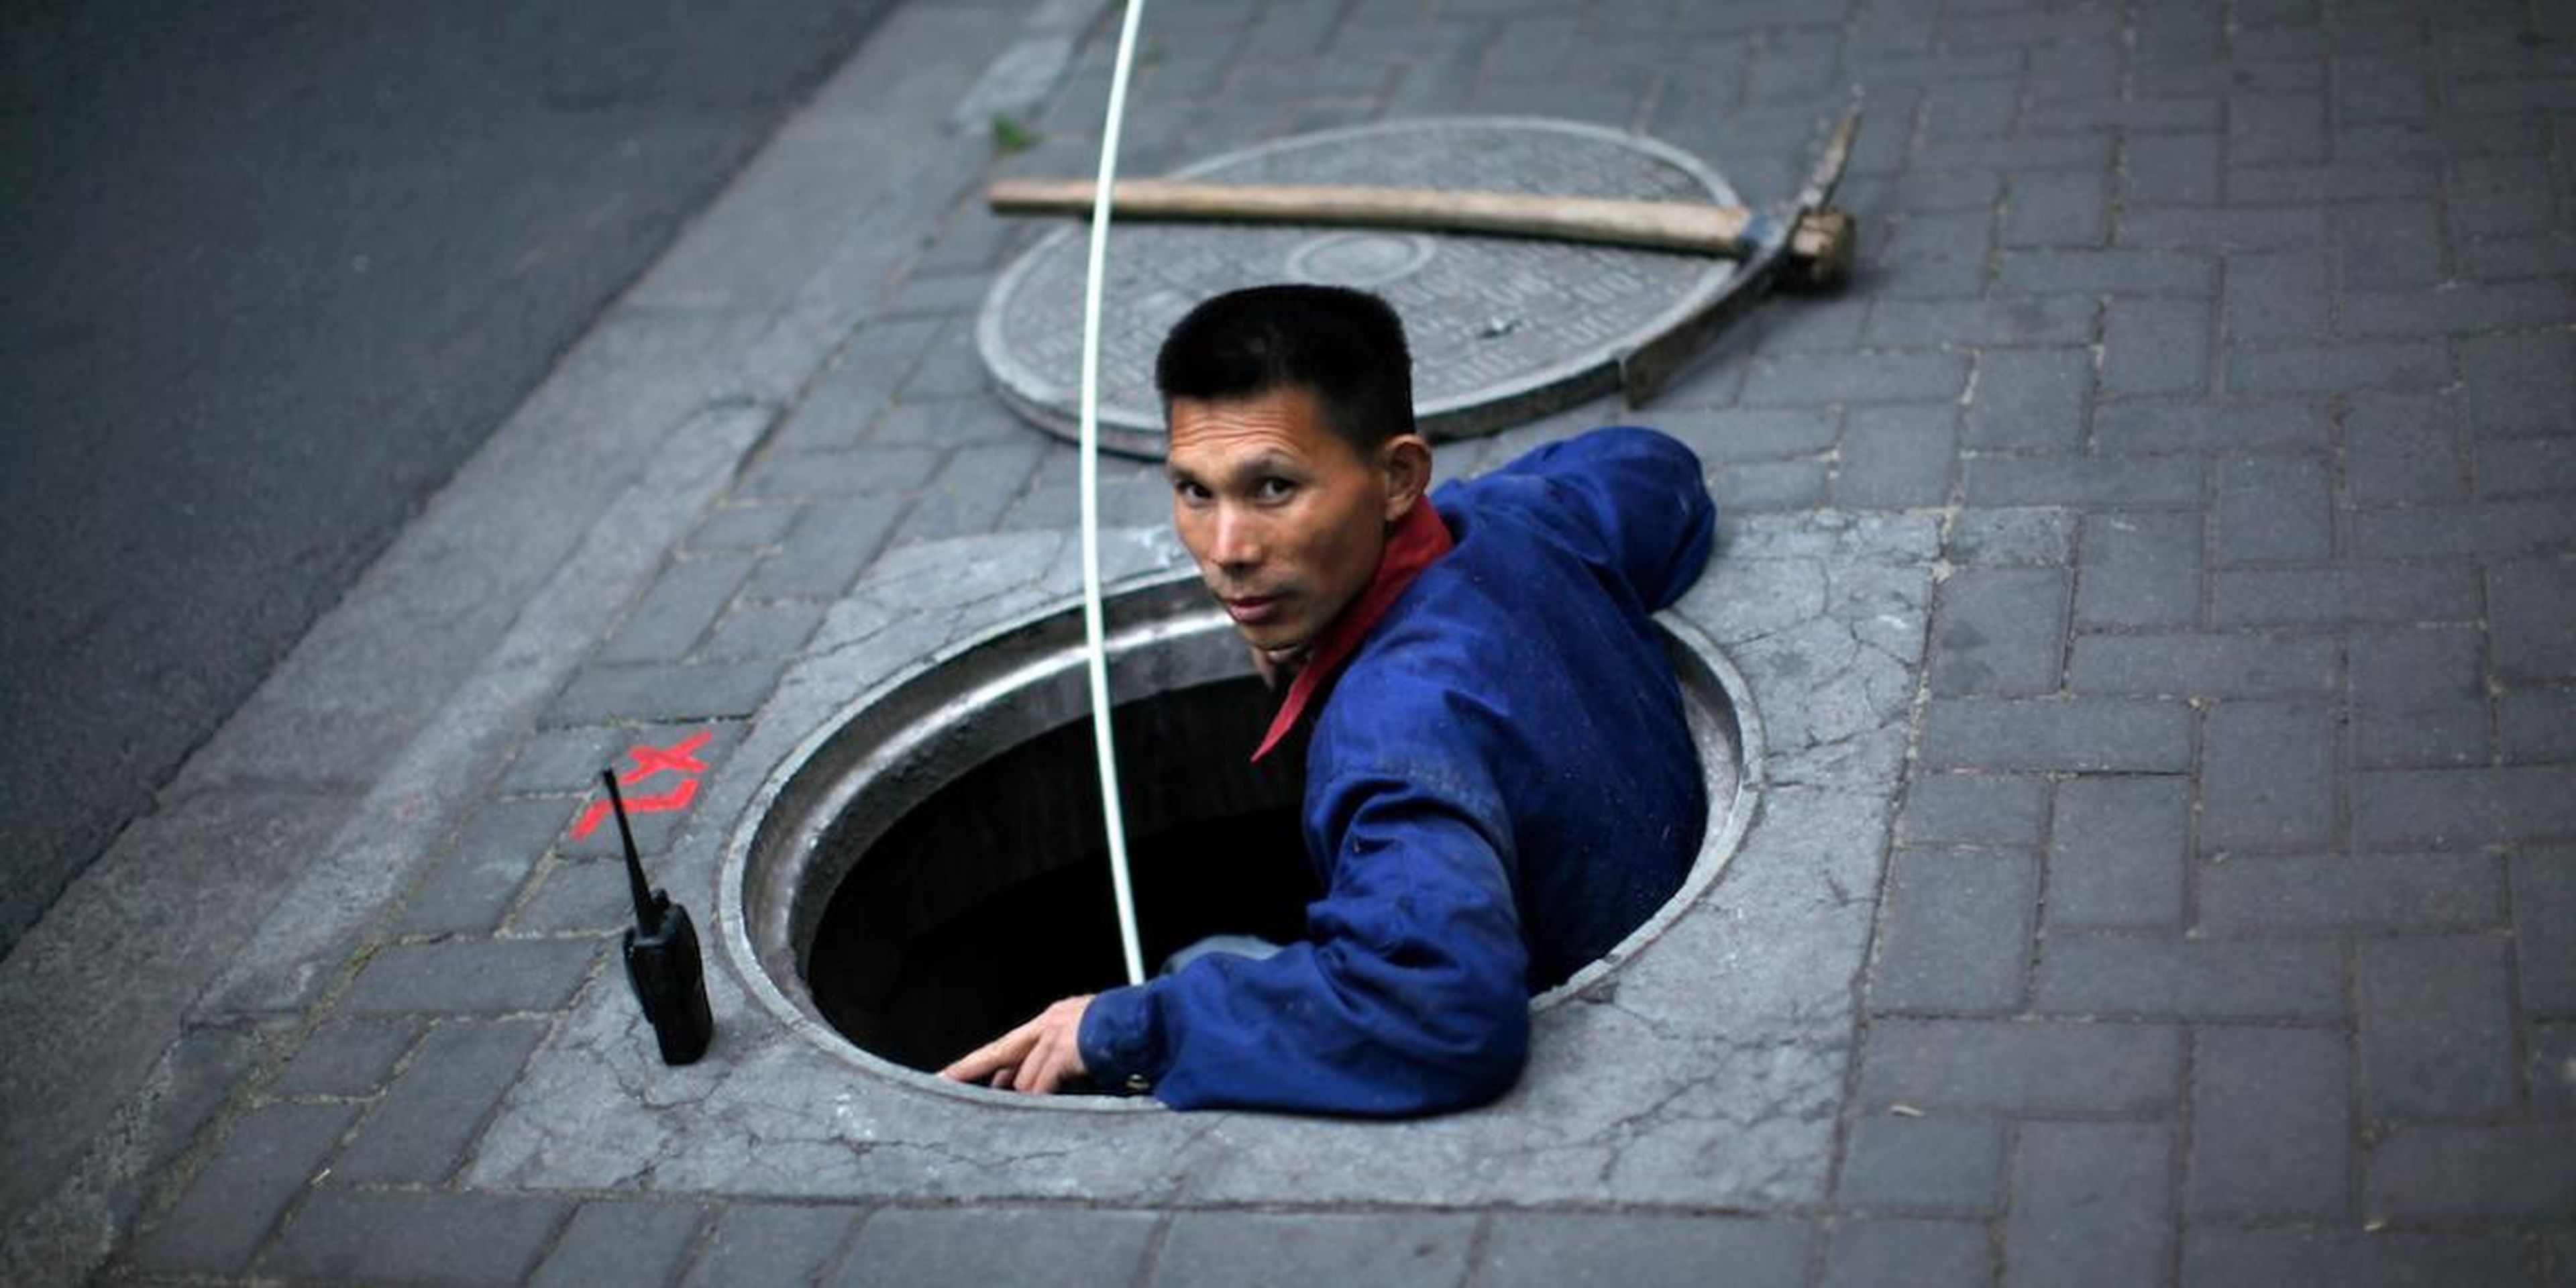 Chinese authorities want to start sifting through sewage wastewater to catch illegal drug users. Stock photo used for illustrative purposes.